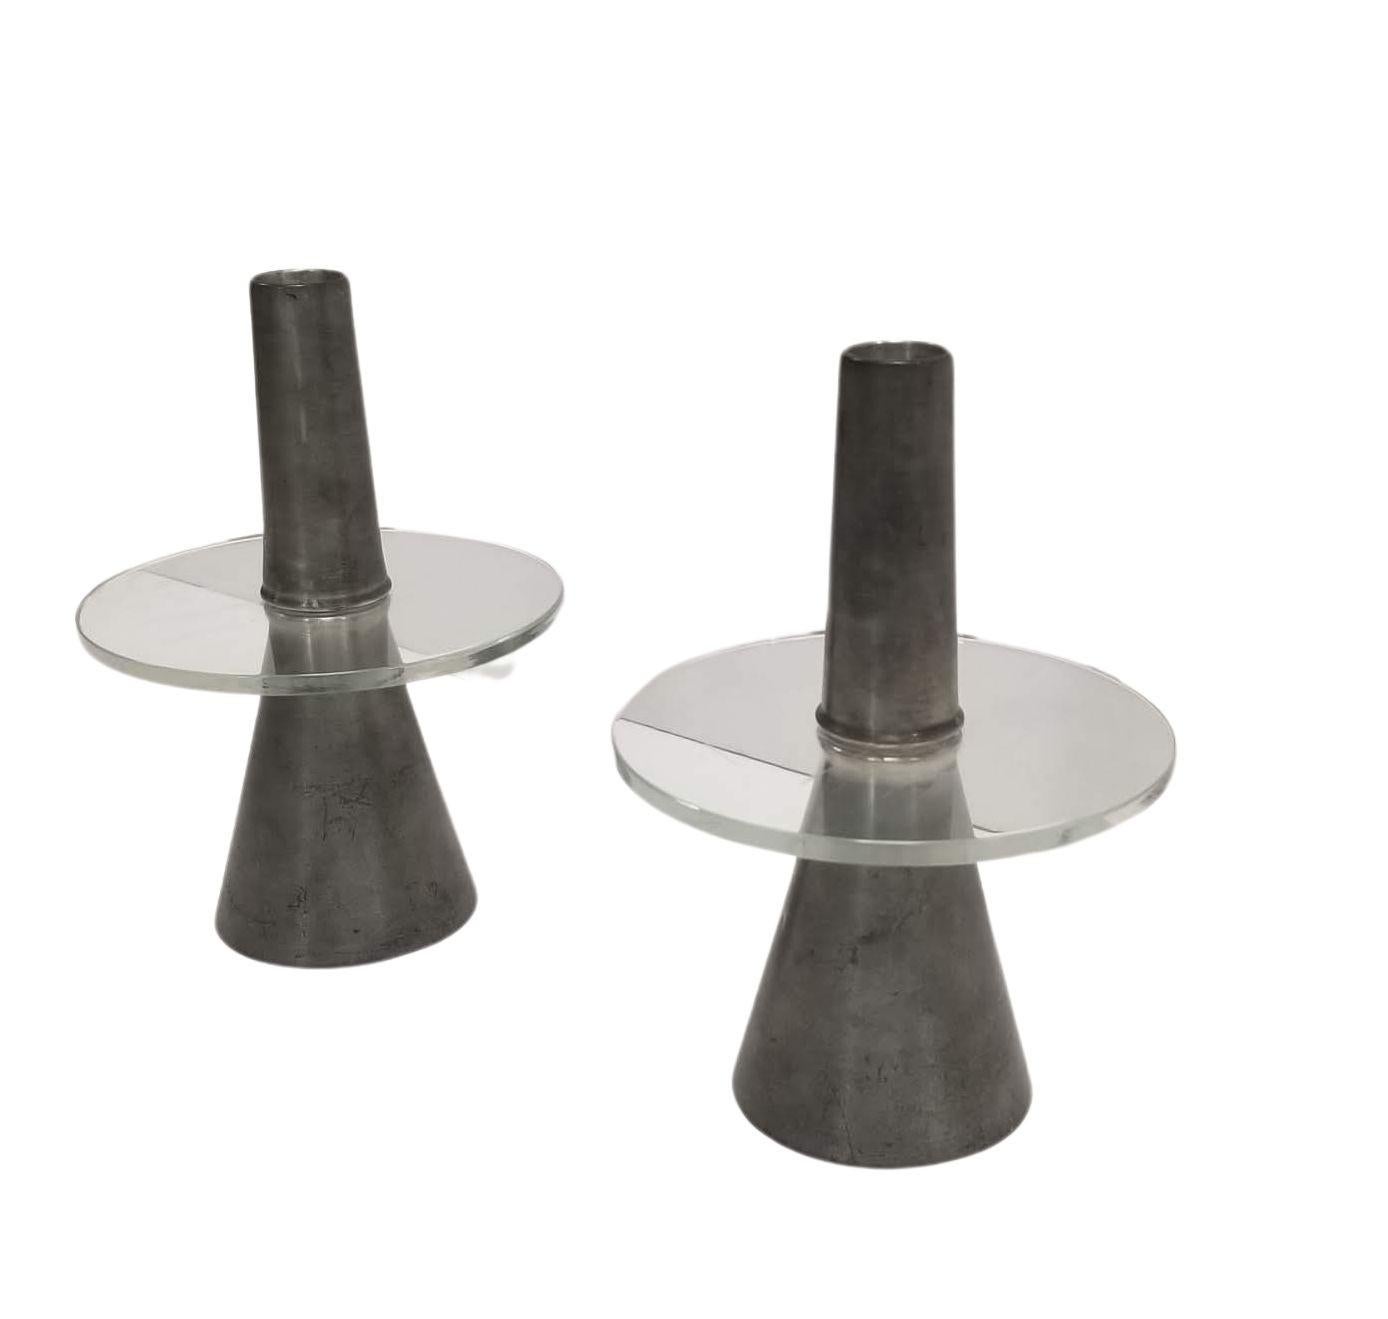 This elegant candlestick seamlessly marries pewter and glass in a sophisticated design composed of three distinct parts.
The foundation is a gracefully tapered conical base, providing stability and aesthetic appeal.
At its summit, a glass disc